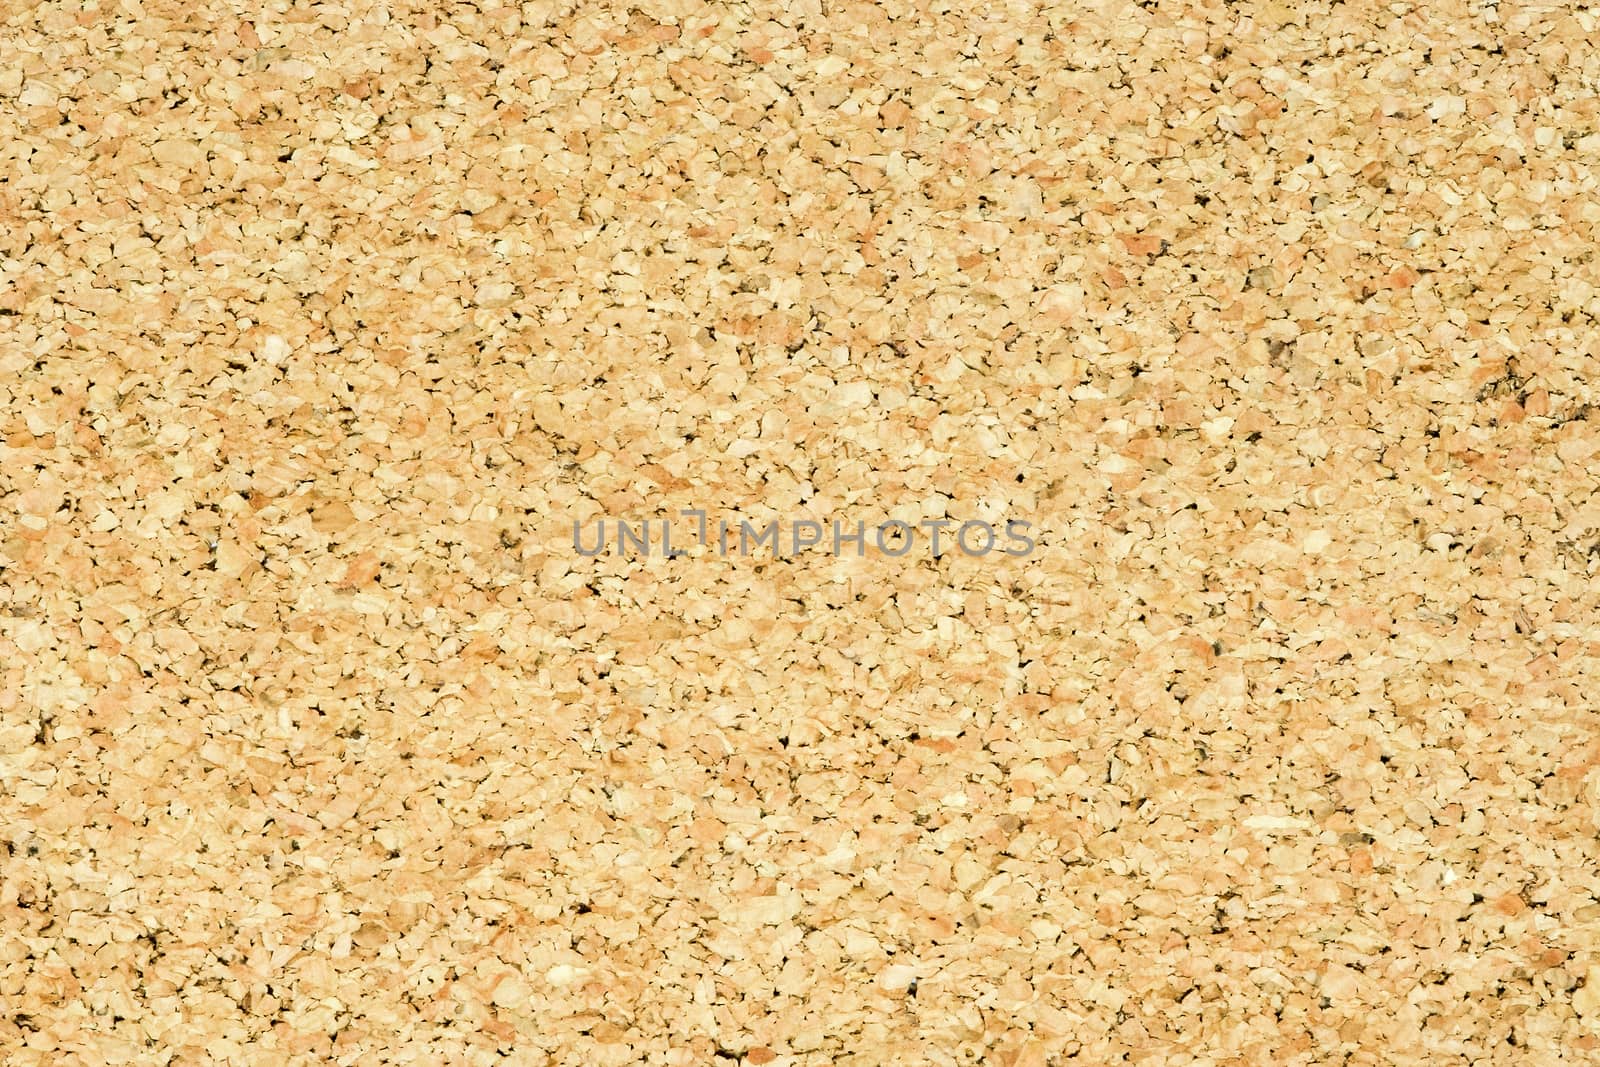 An image of a typical cork background texture